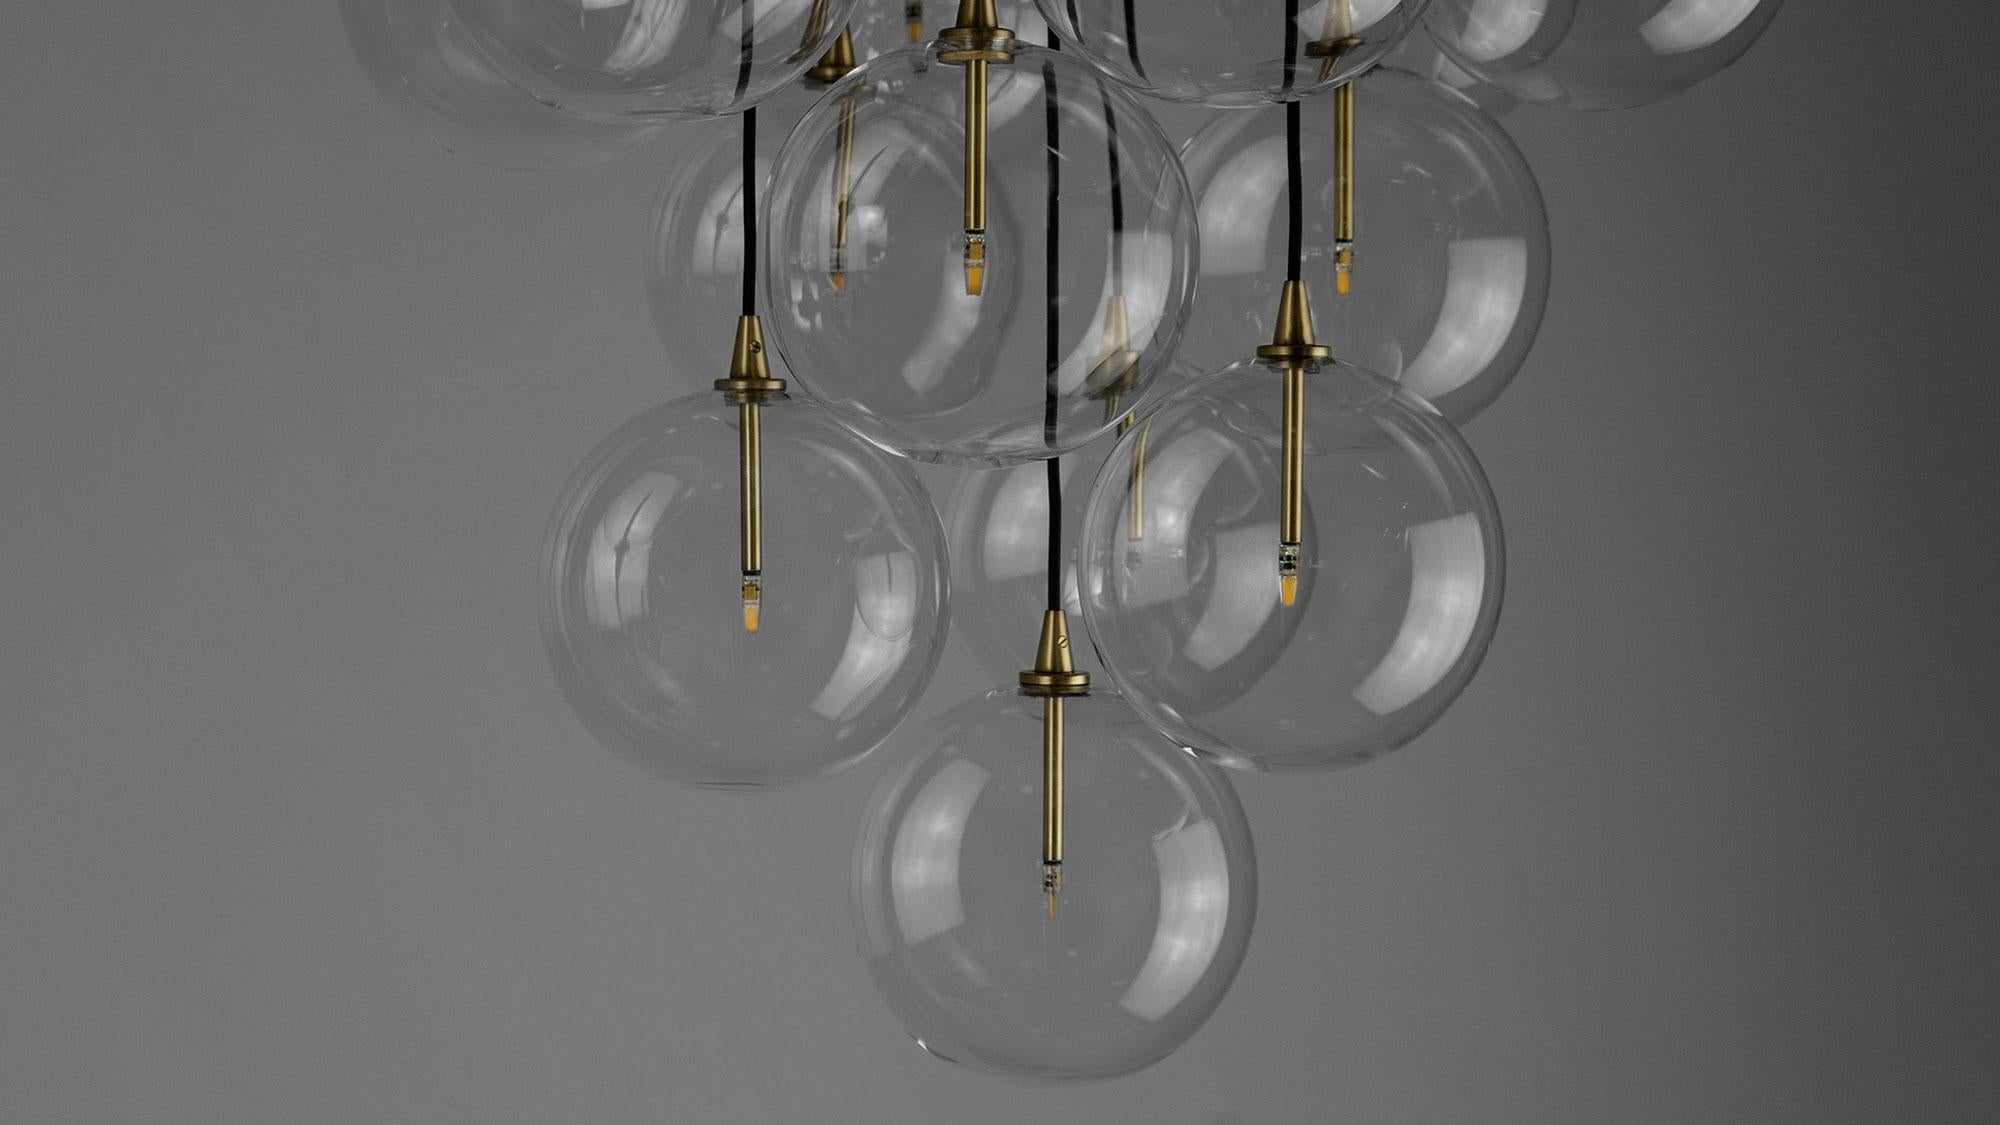 An arrangement of thirteen glass globes suspended from a discus of brass forms a serene ceiling constellation. The repeated sphere appears like a bundle of grapes, a tantalizing cluster floating in the air.

Available in our three signature